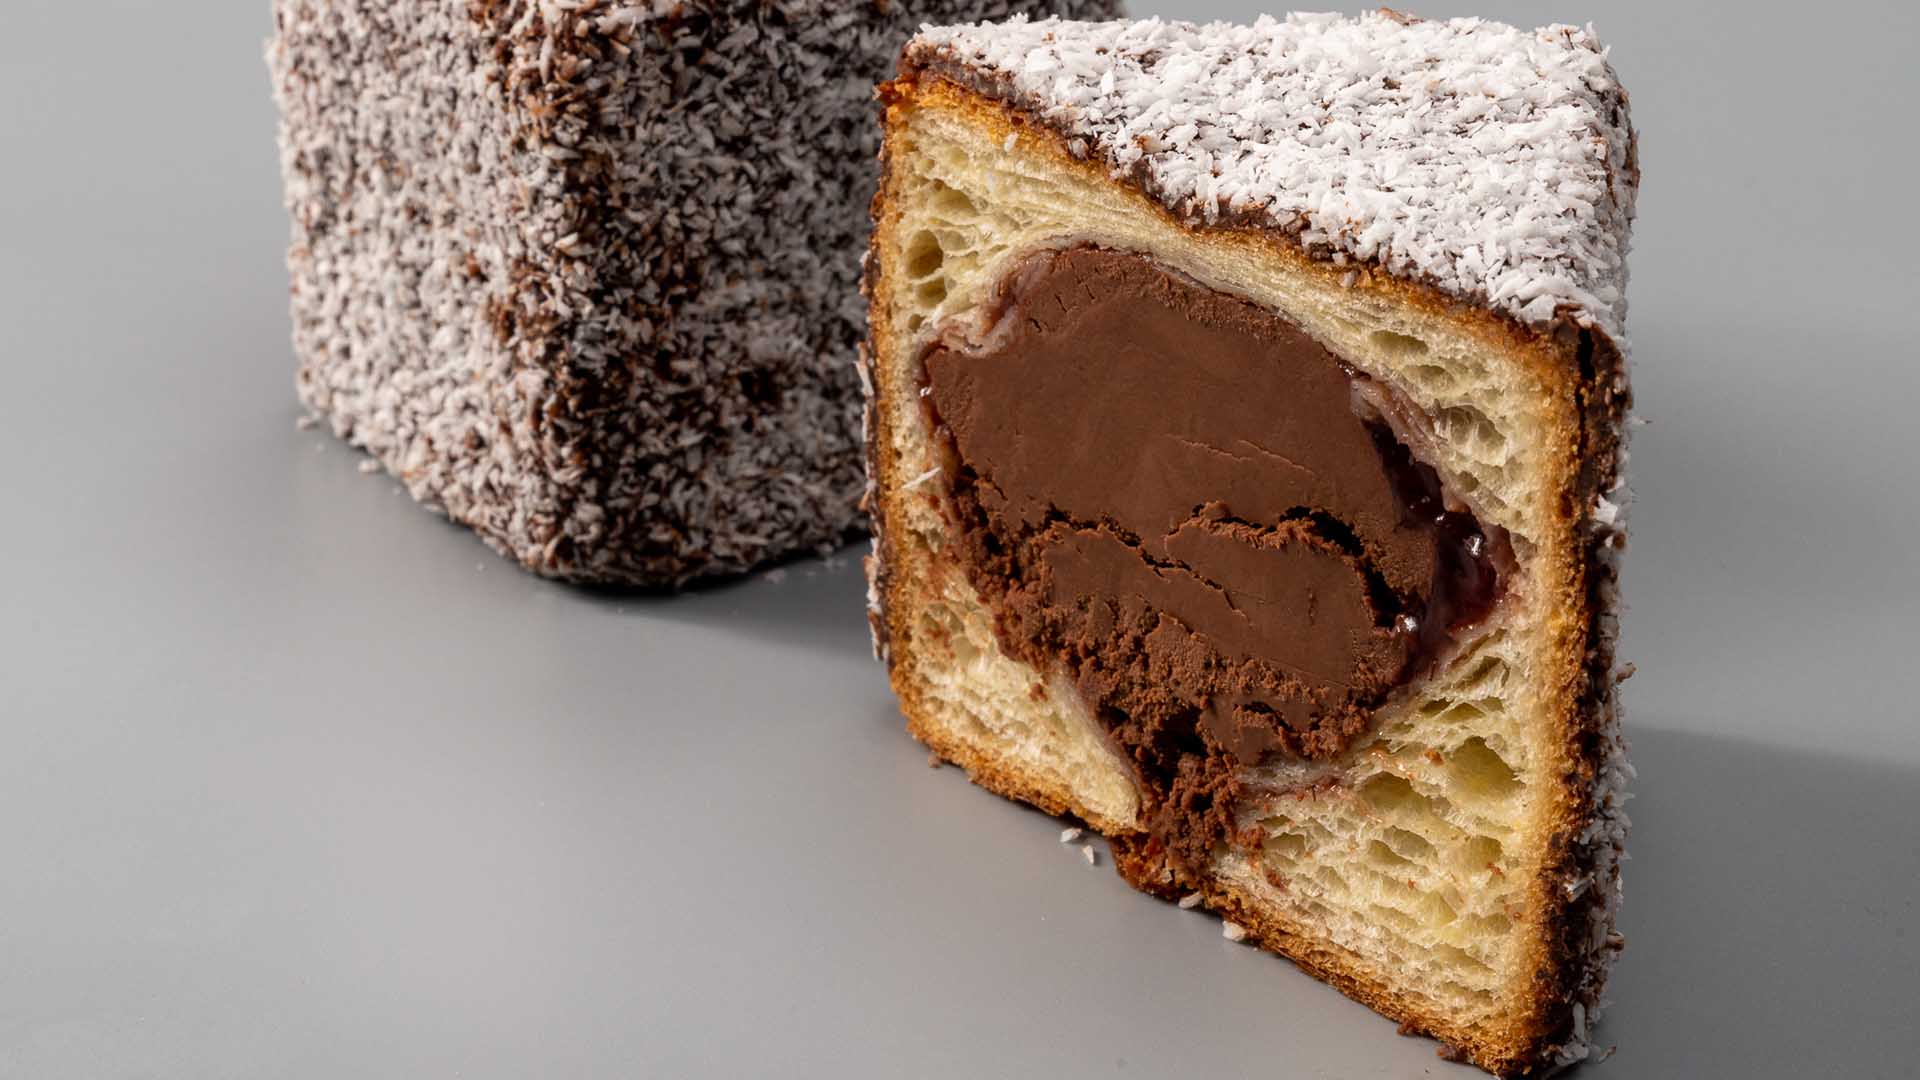 Banksia Bakehouse's Cube-Shaped Lamington Croissant Is the Next OTT Dessert You Need to Try